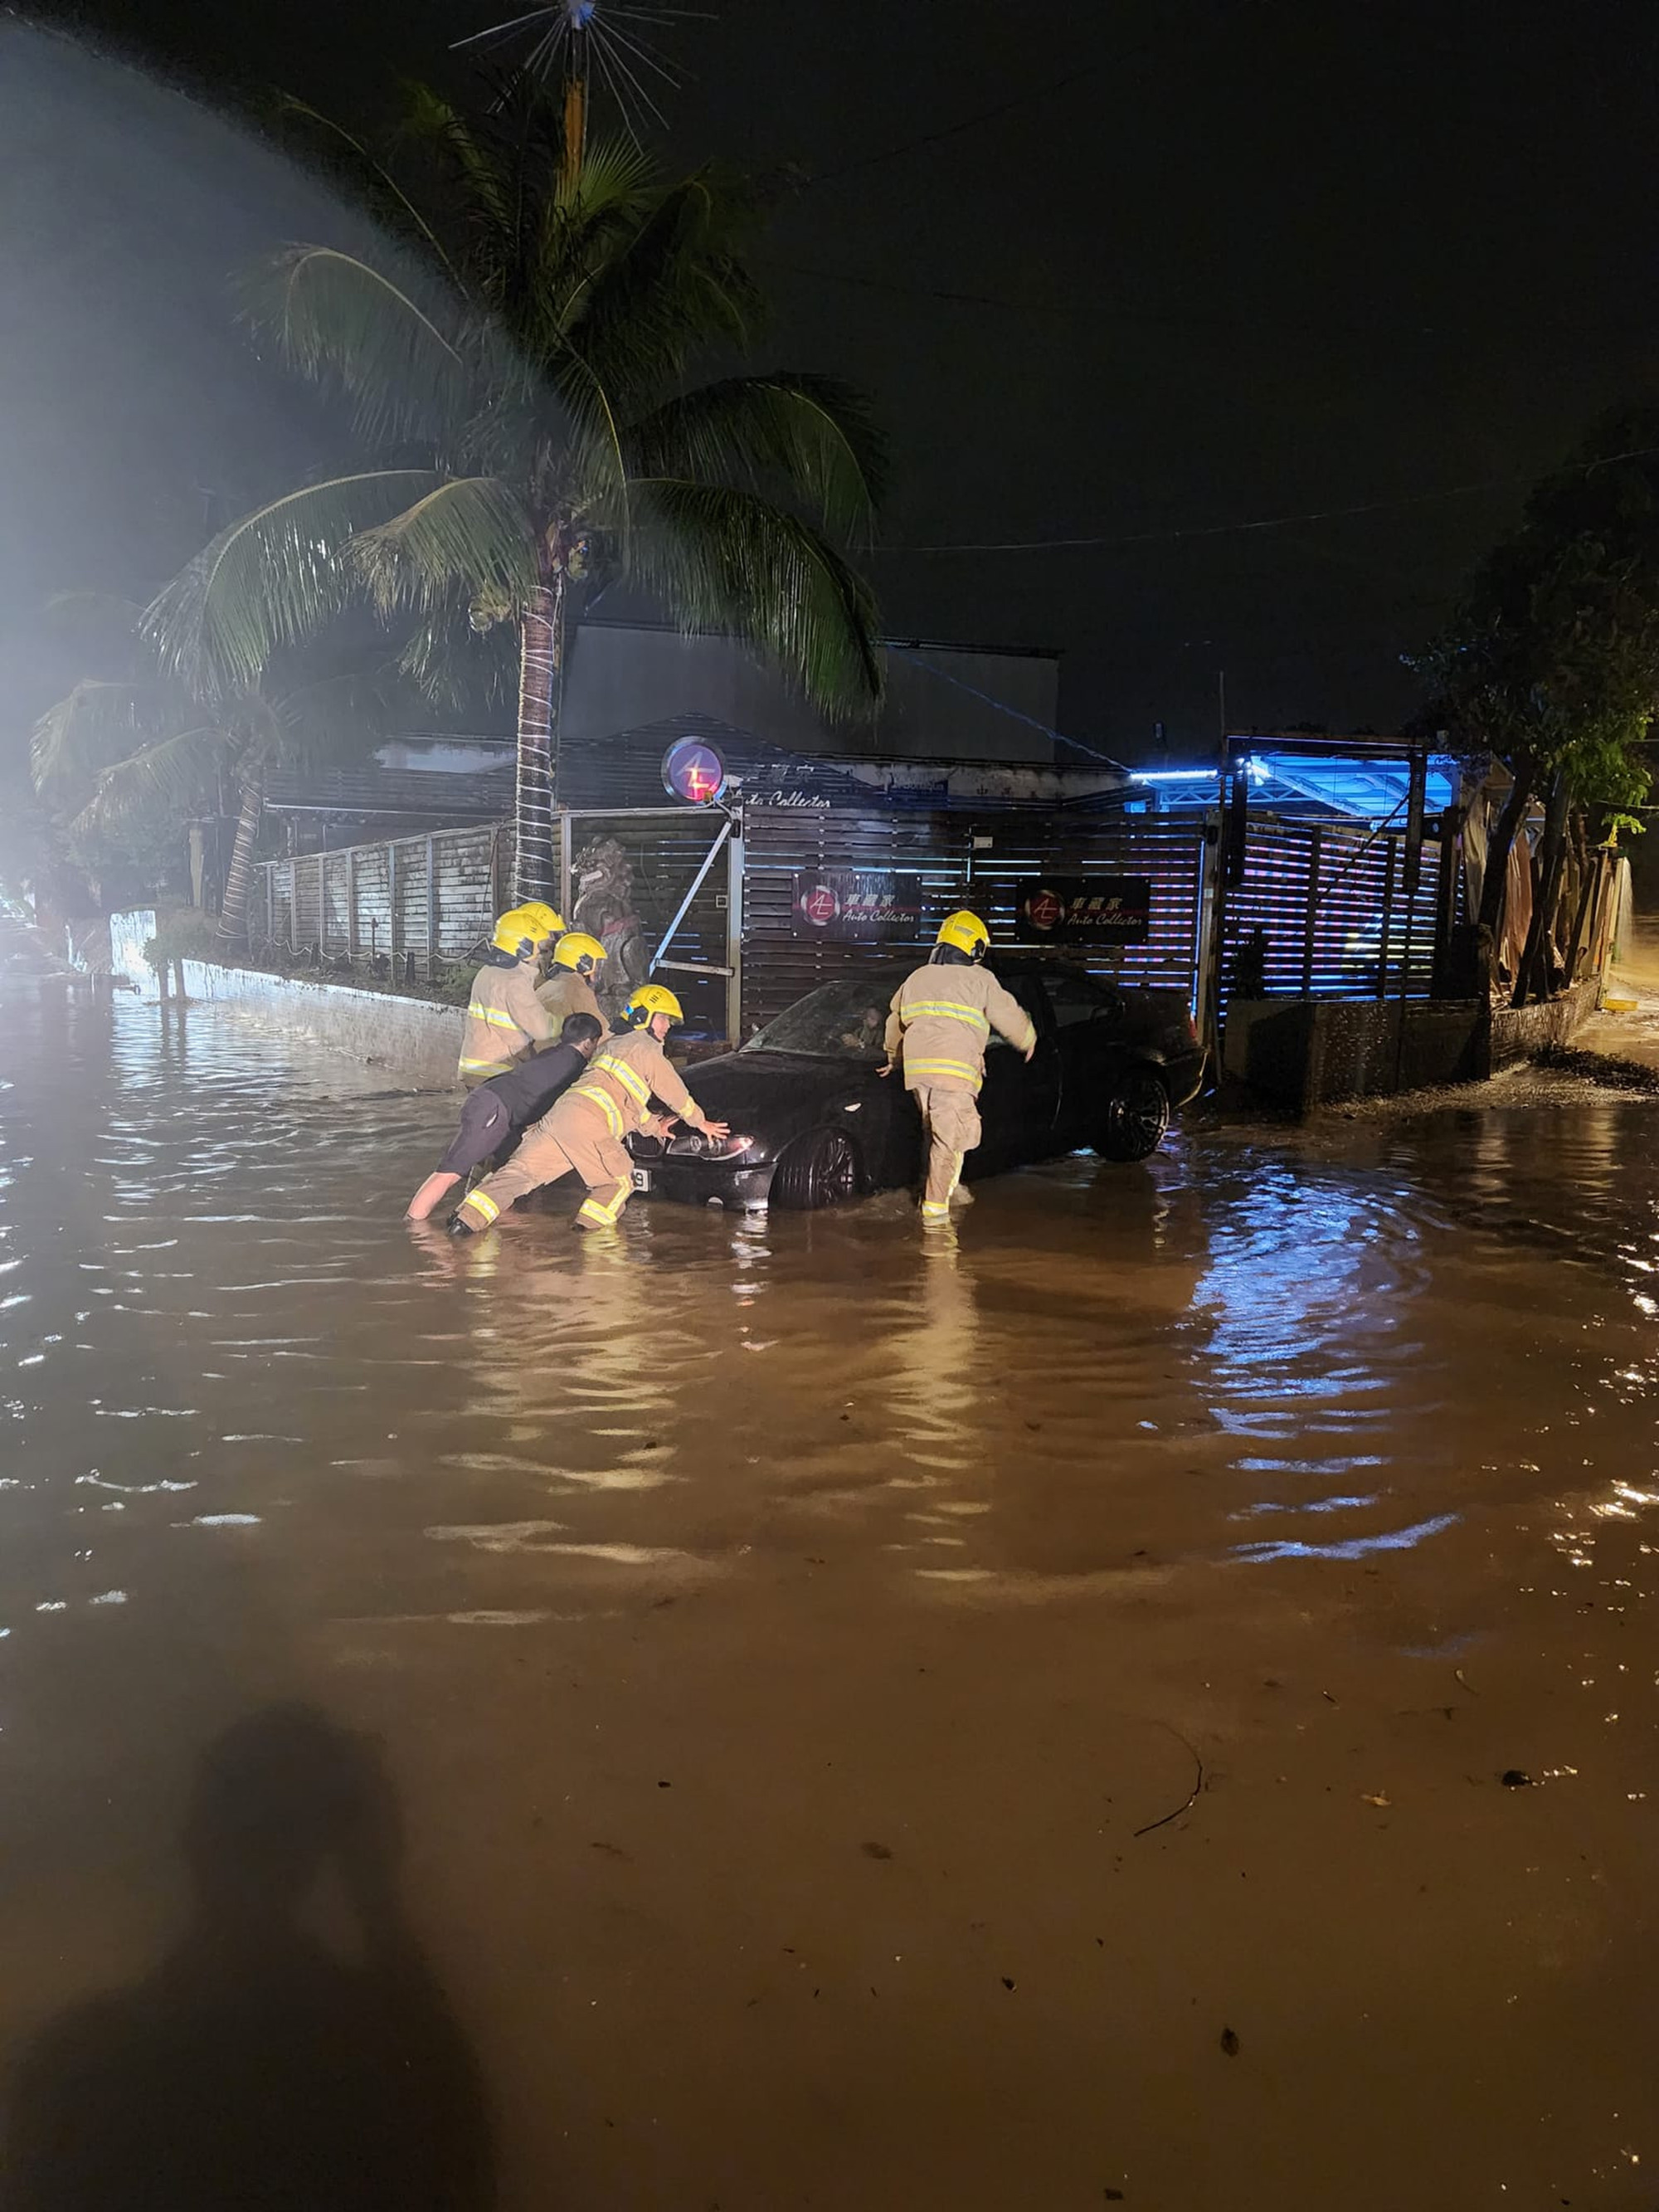 Hong Kong flood aftermath: police confirm identity of remains found ...